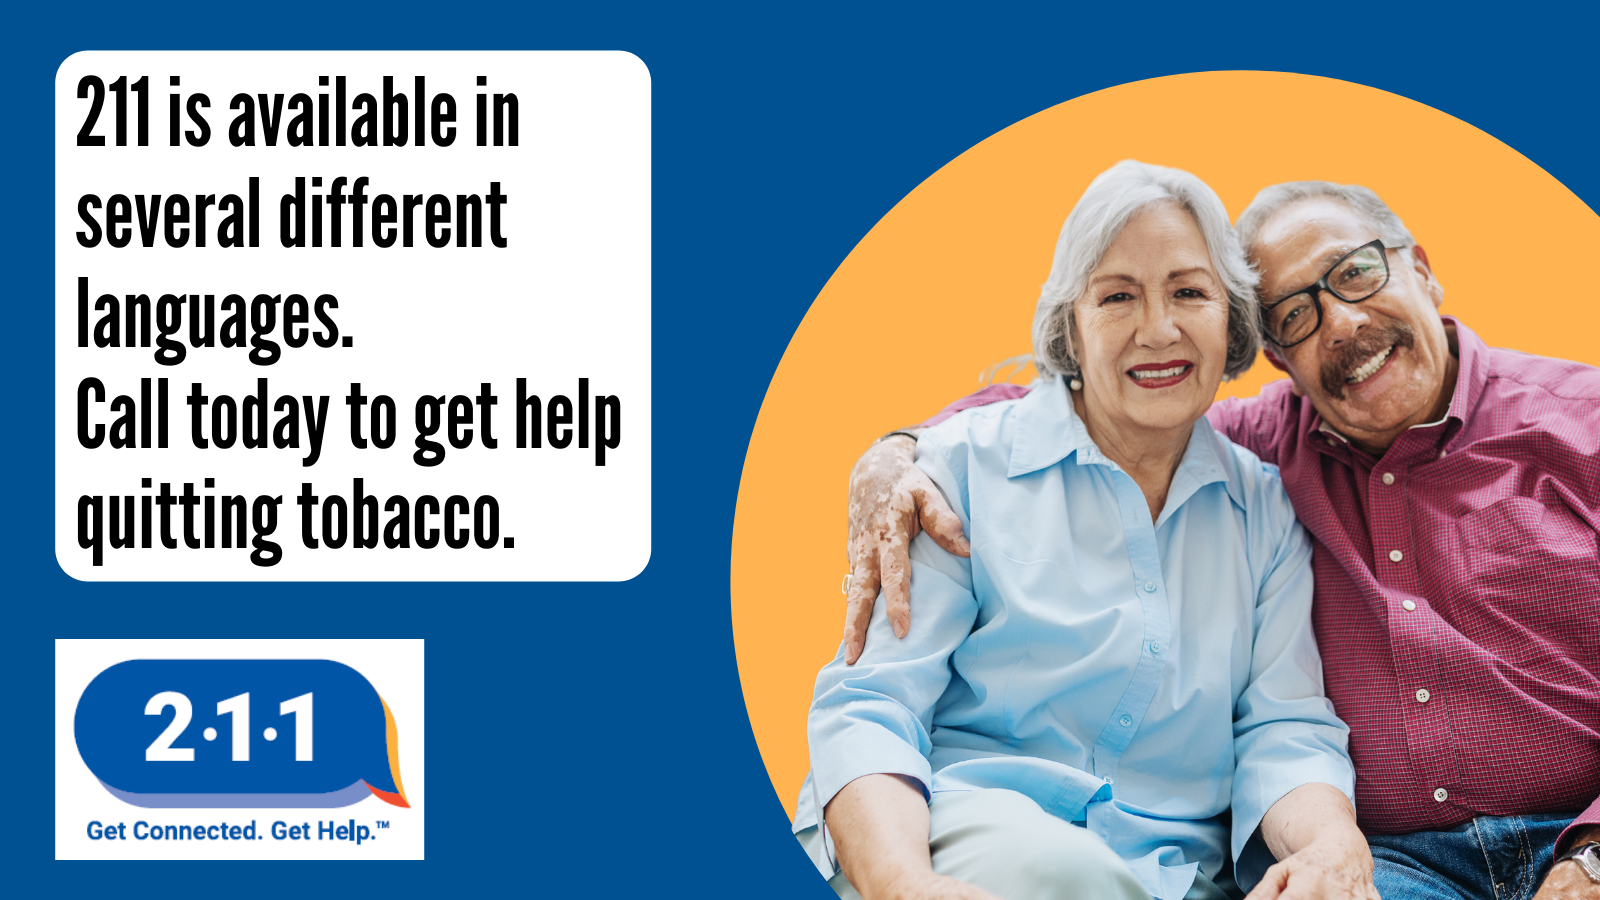 Image 2 senior citizens and text: 211 is available in several different languages. Call today to get help quitting tobacco. 2-1-1